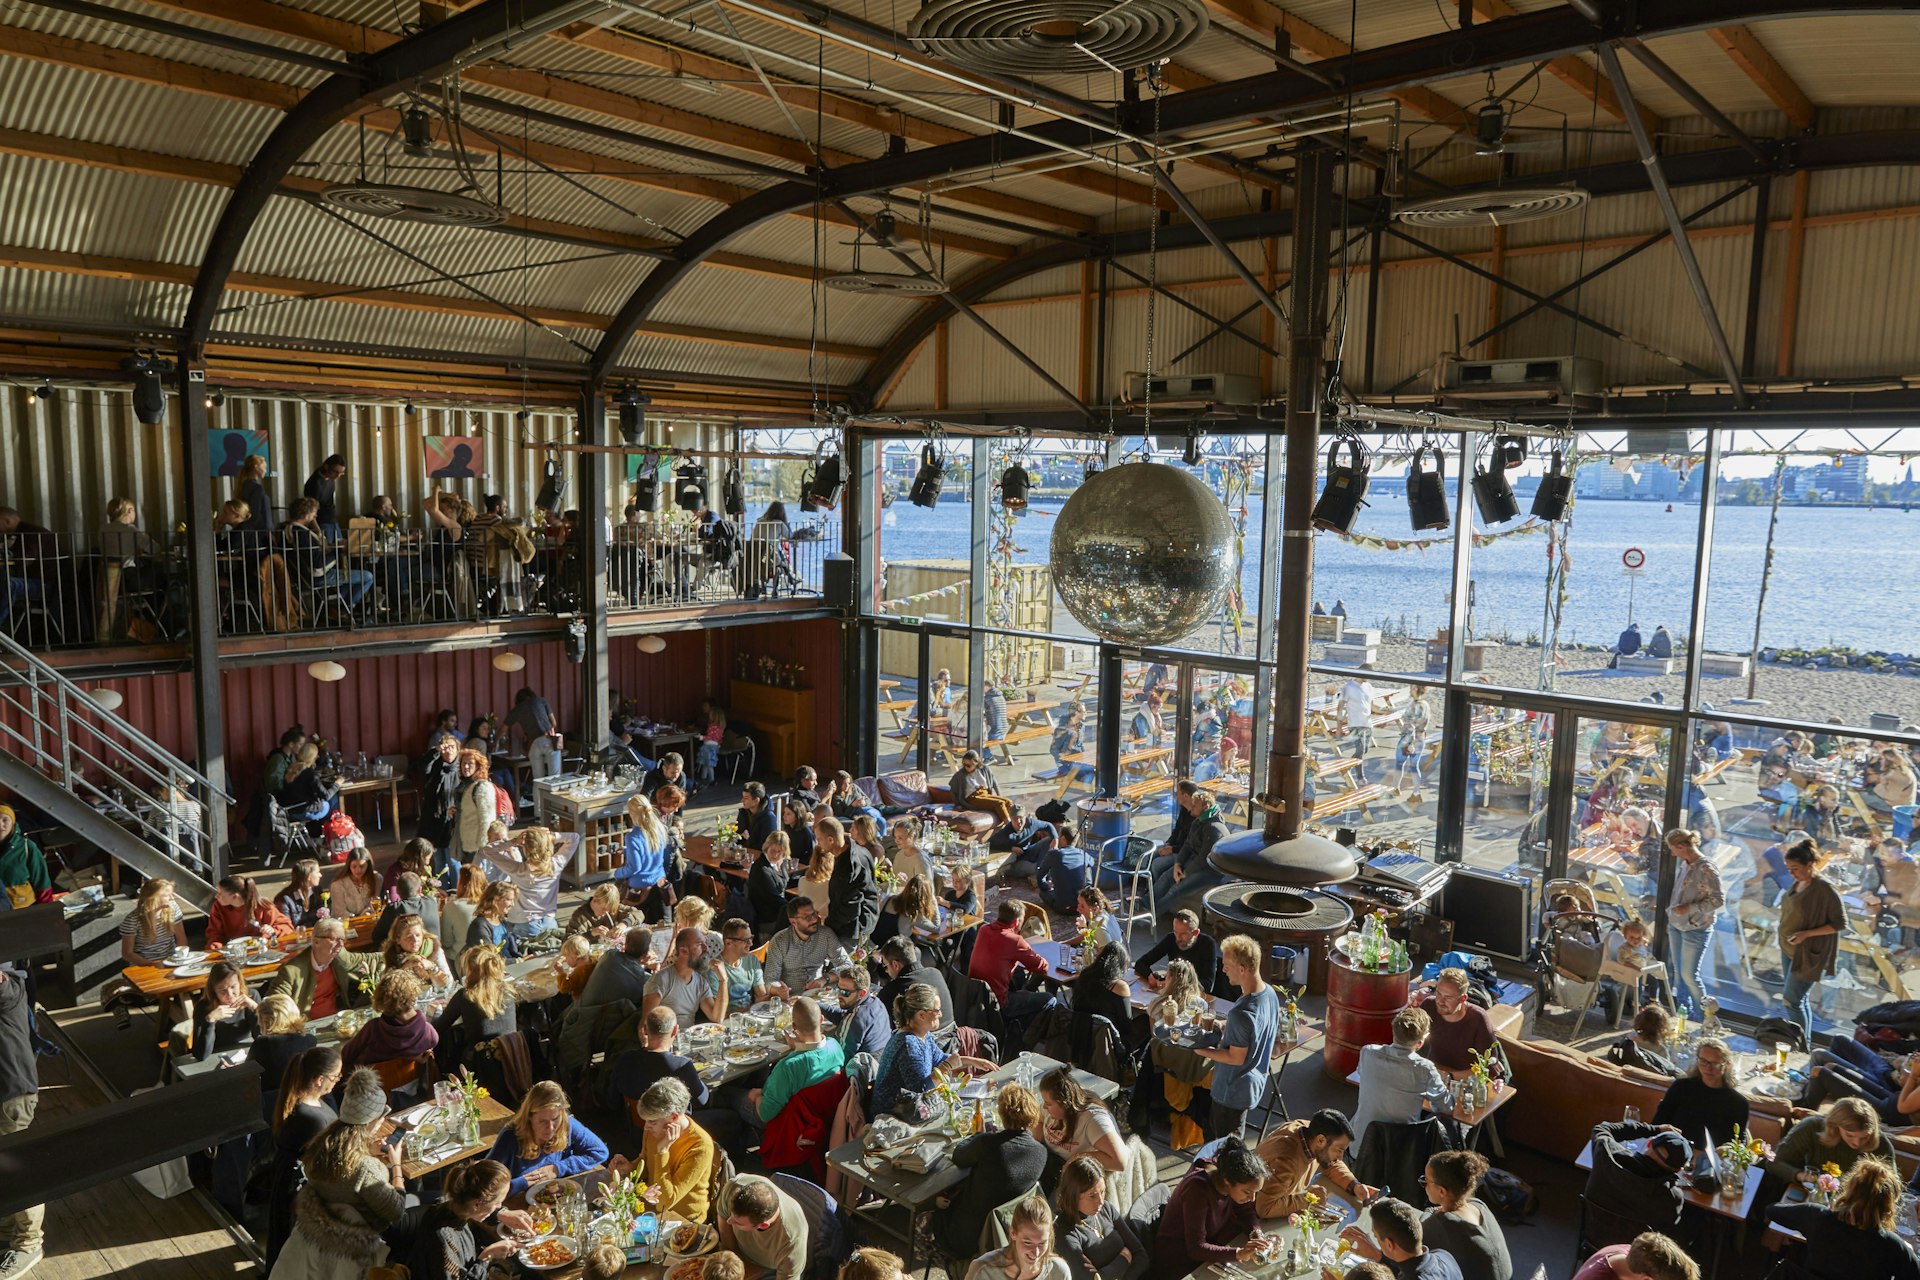 The crowded beer hall filled with drinkers during the day at Pillek Cafe, NDSM wharf, Noord, Amsterdam, Netherlands